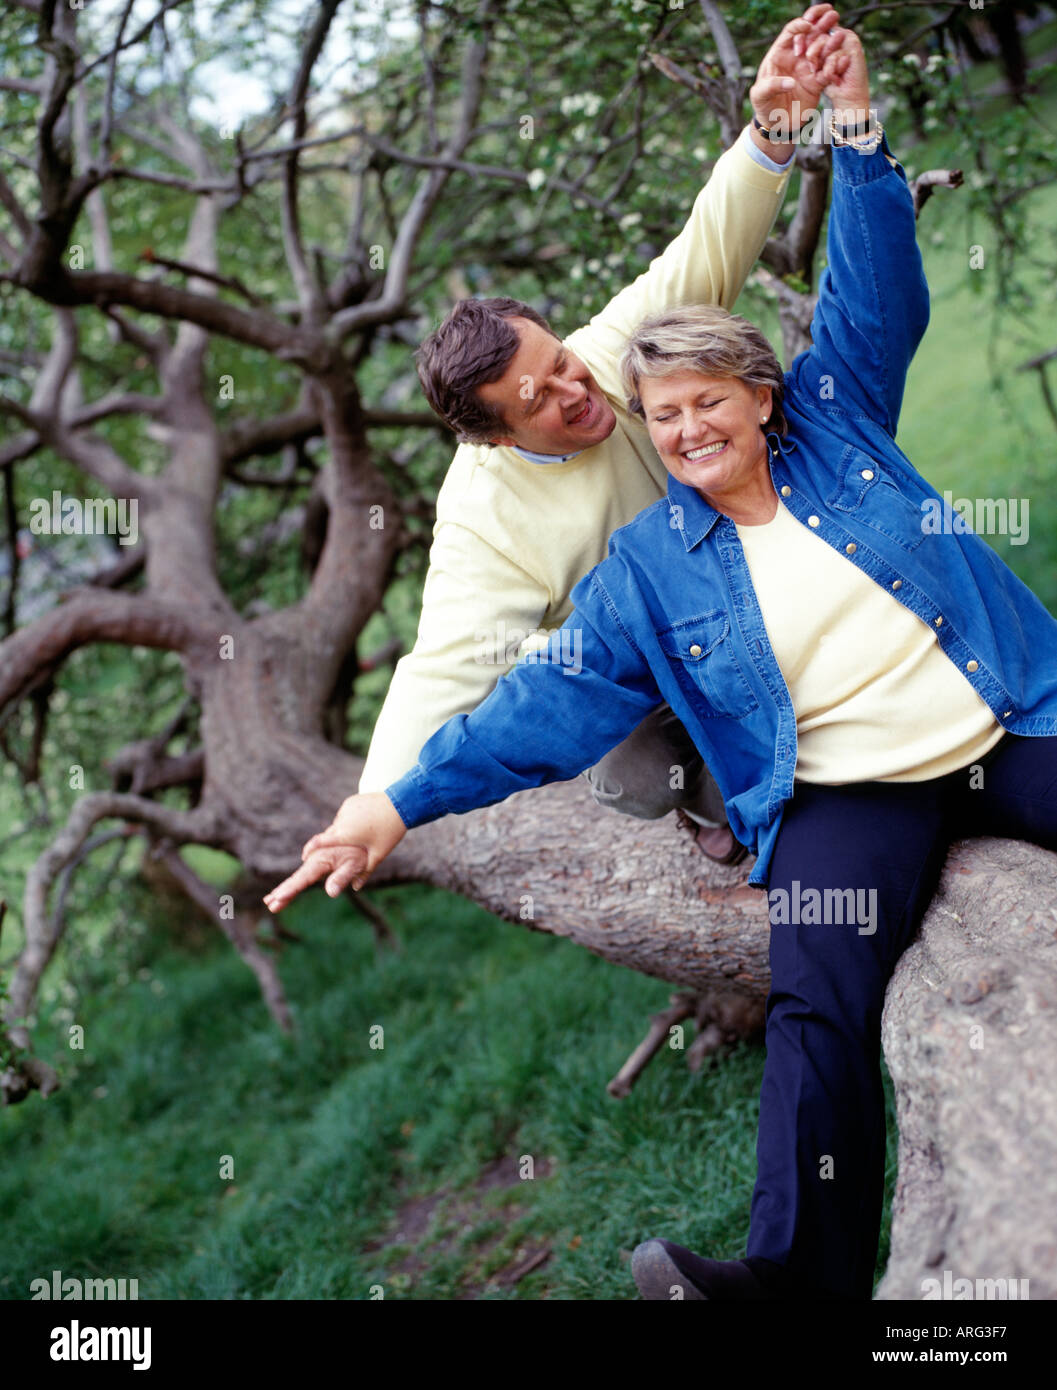 Middle aged couple having fun on tree trunk Banque D'Images